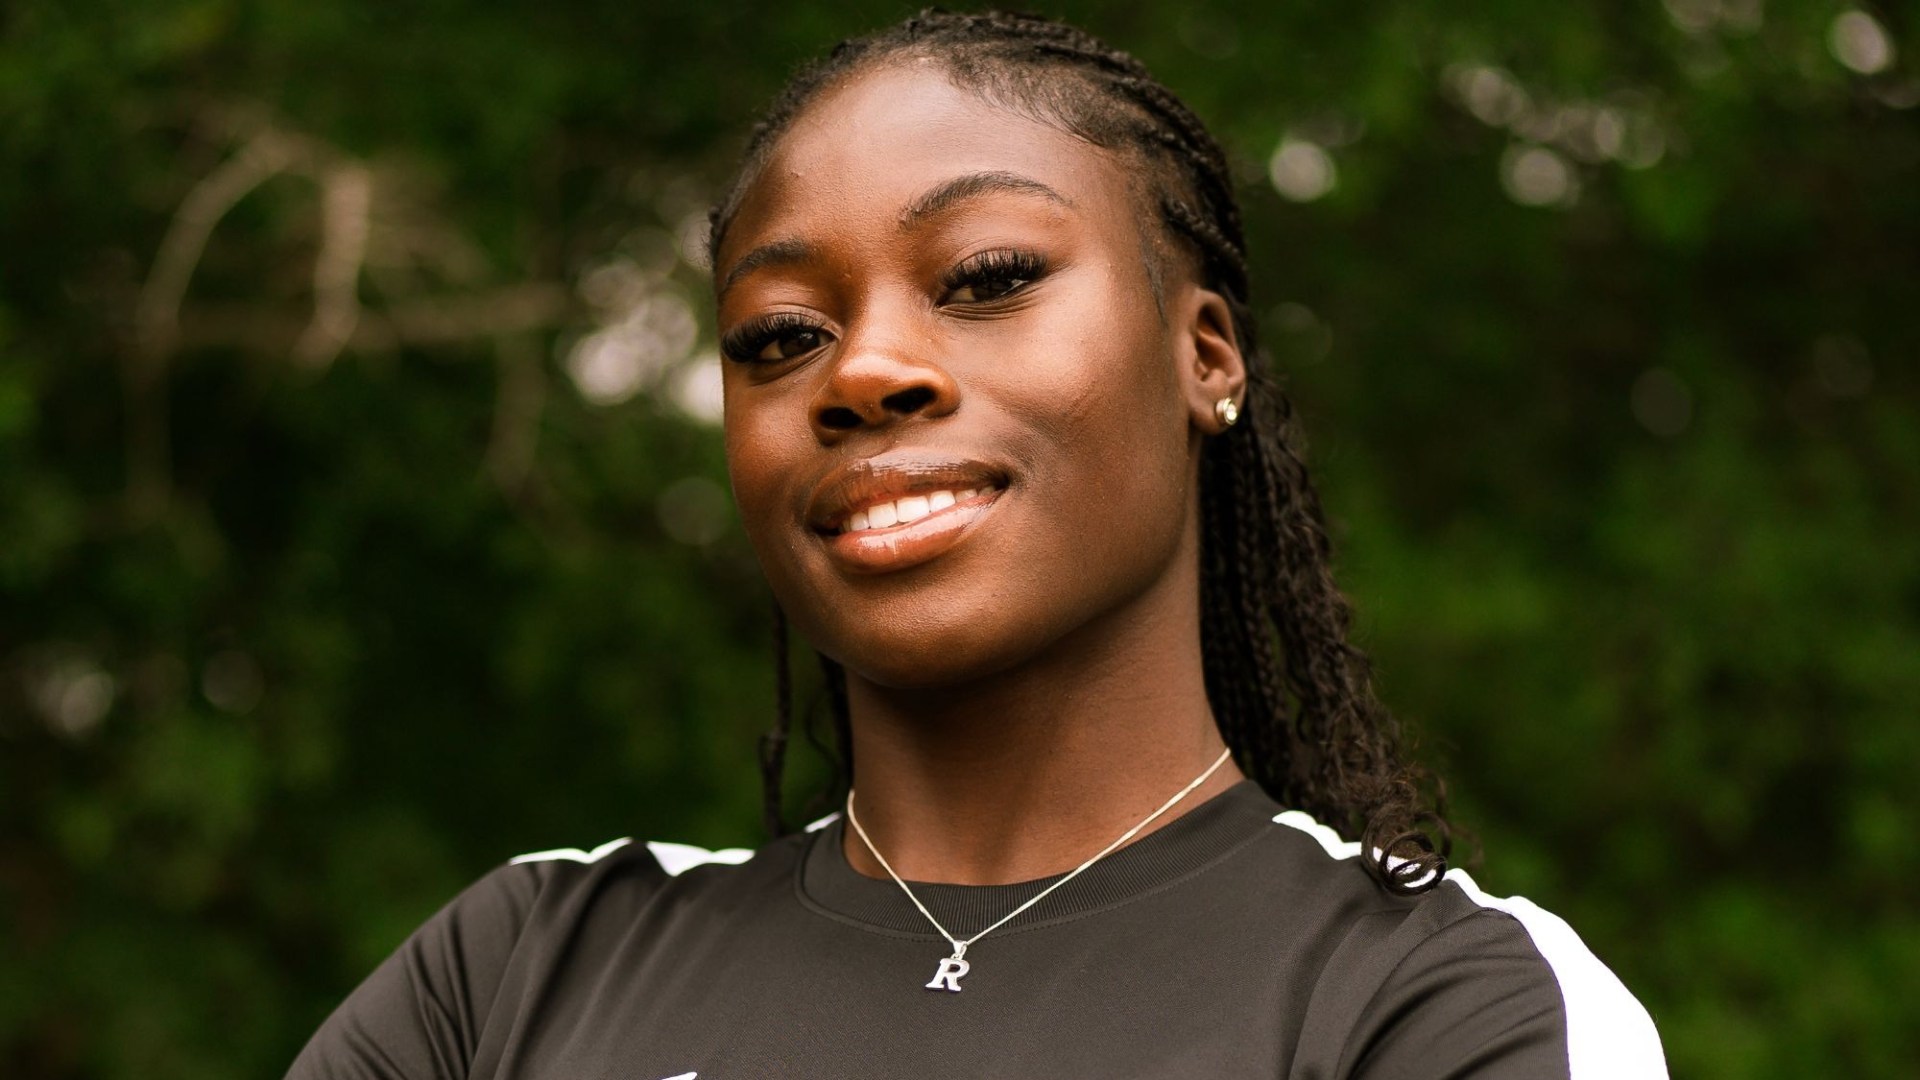 Irish Olympic hopeful Rhasidat Adeleke pays emotional tribute to her first coach who ‘showed me values to have in life’ [Video]